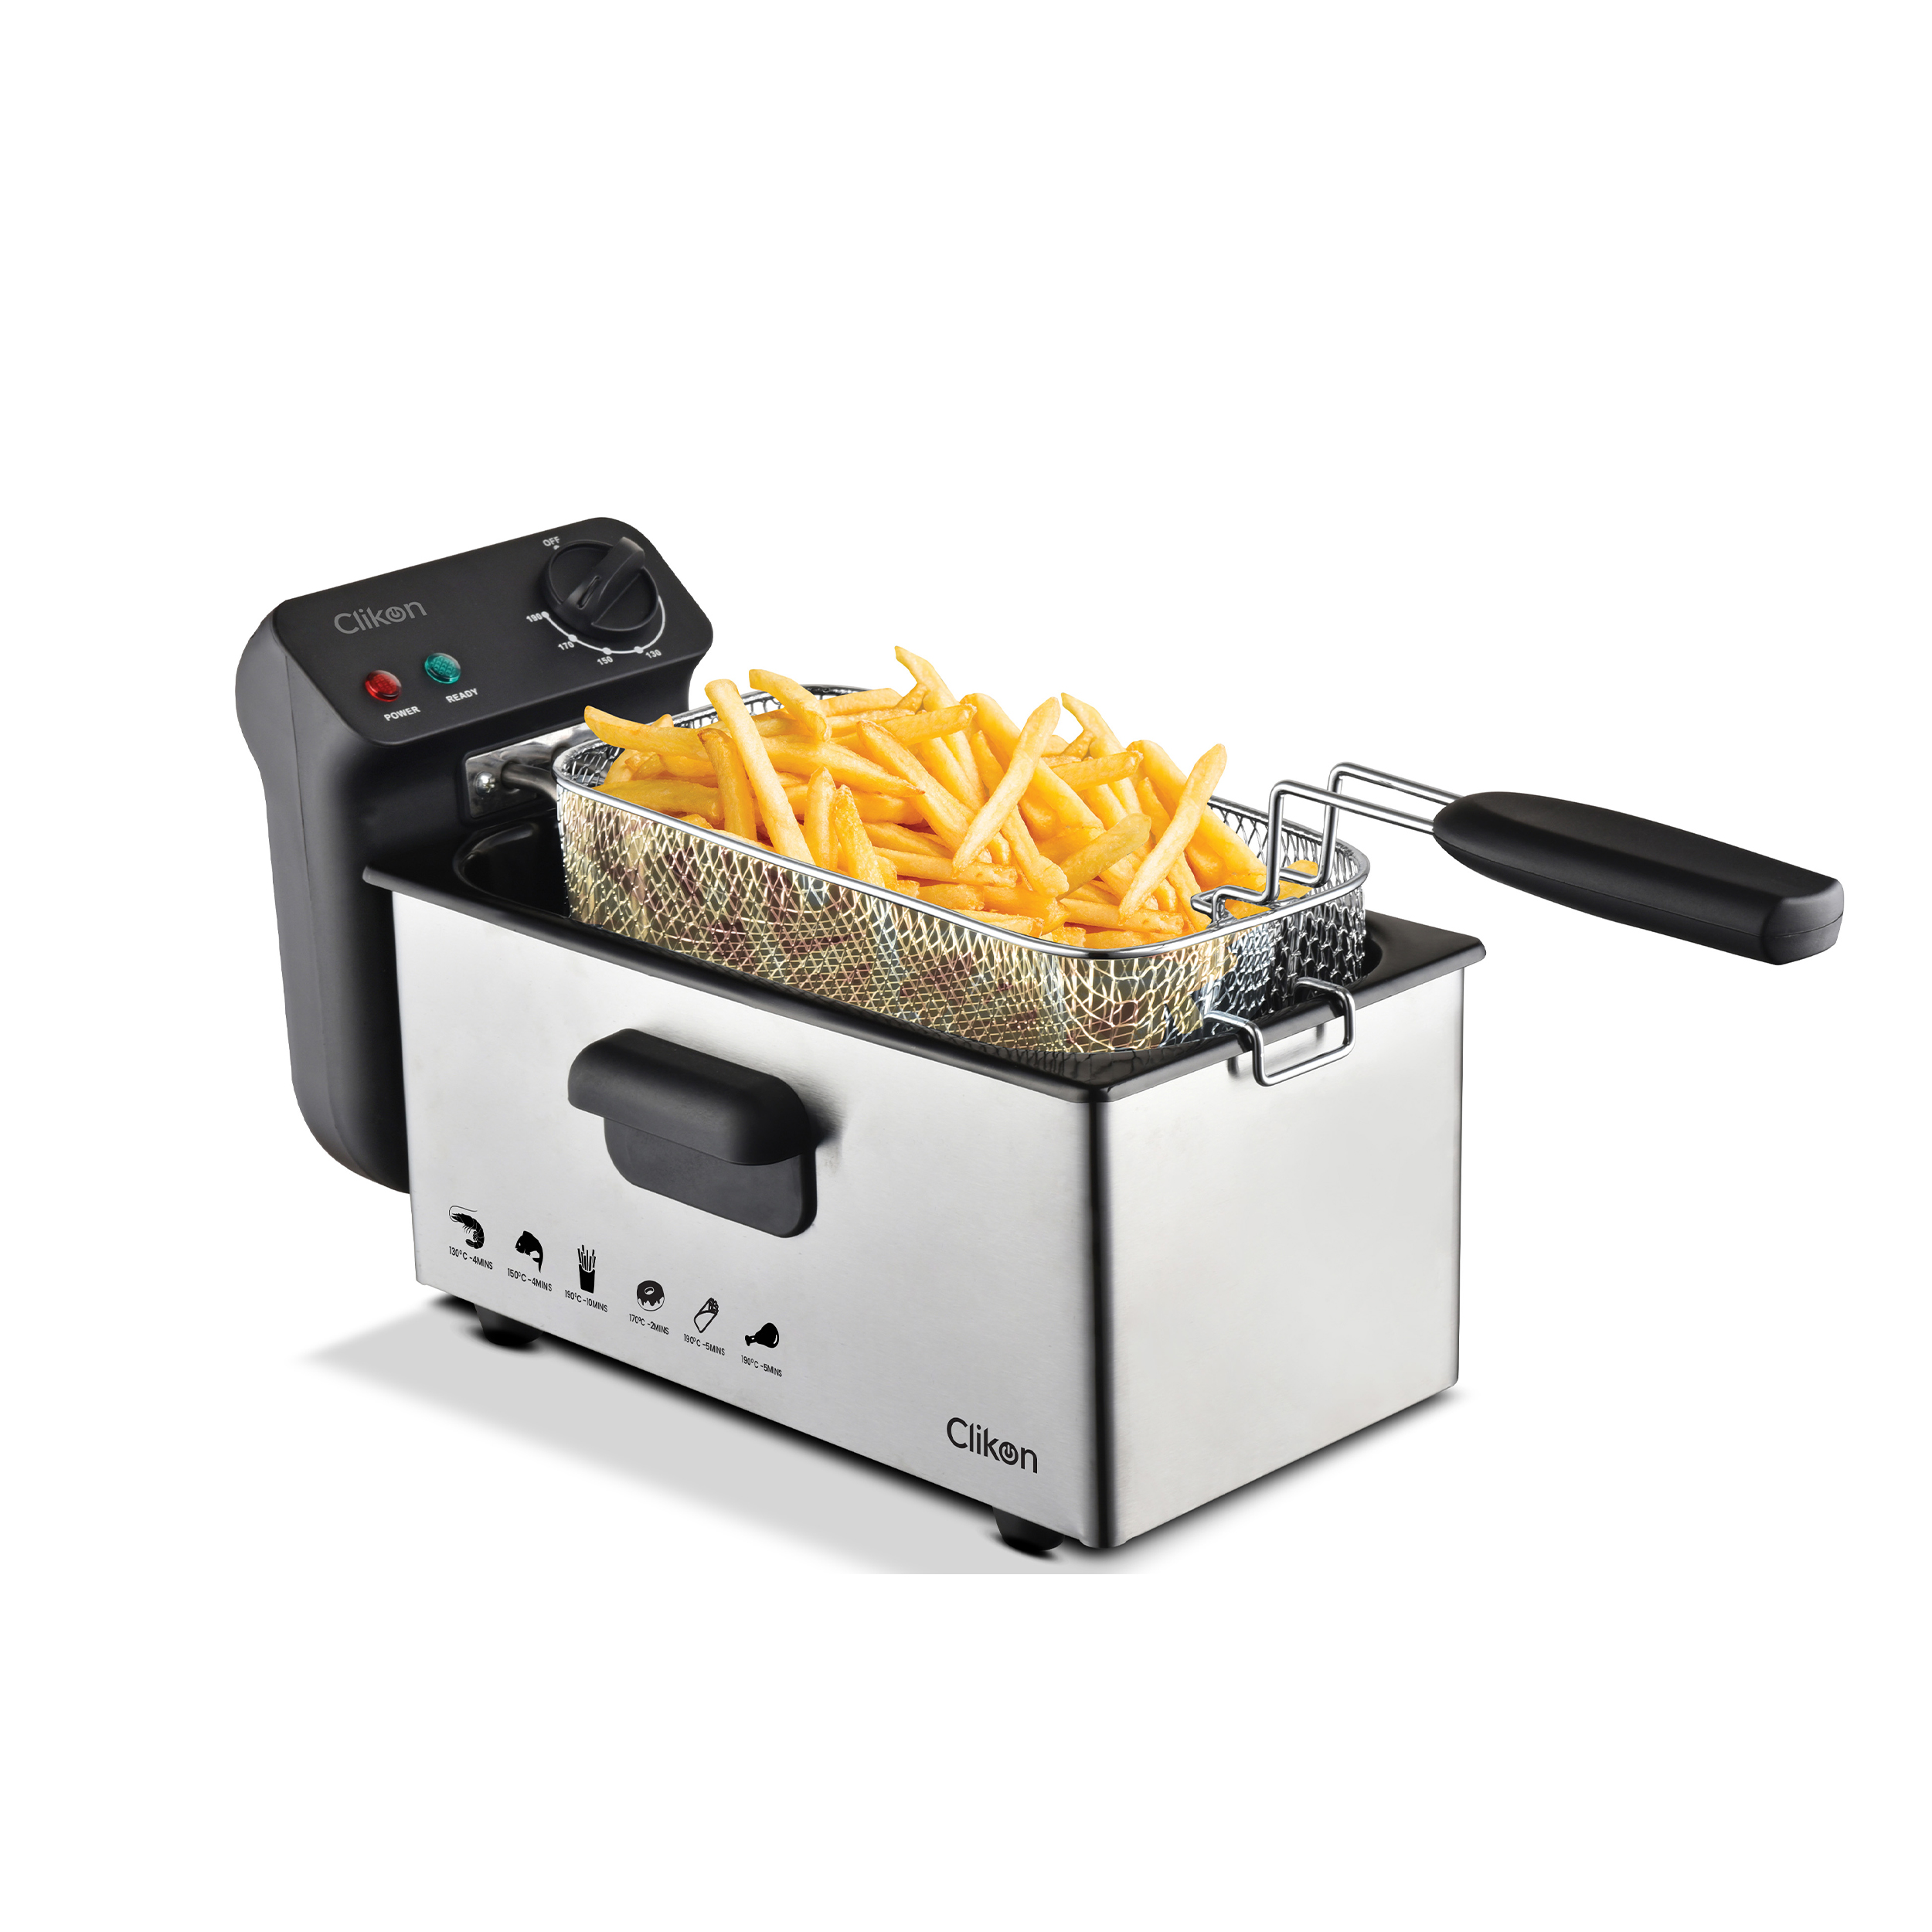 Clikon 3L Deep Fryer With Brushed Stainless Steel Housing-Ck358